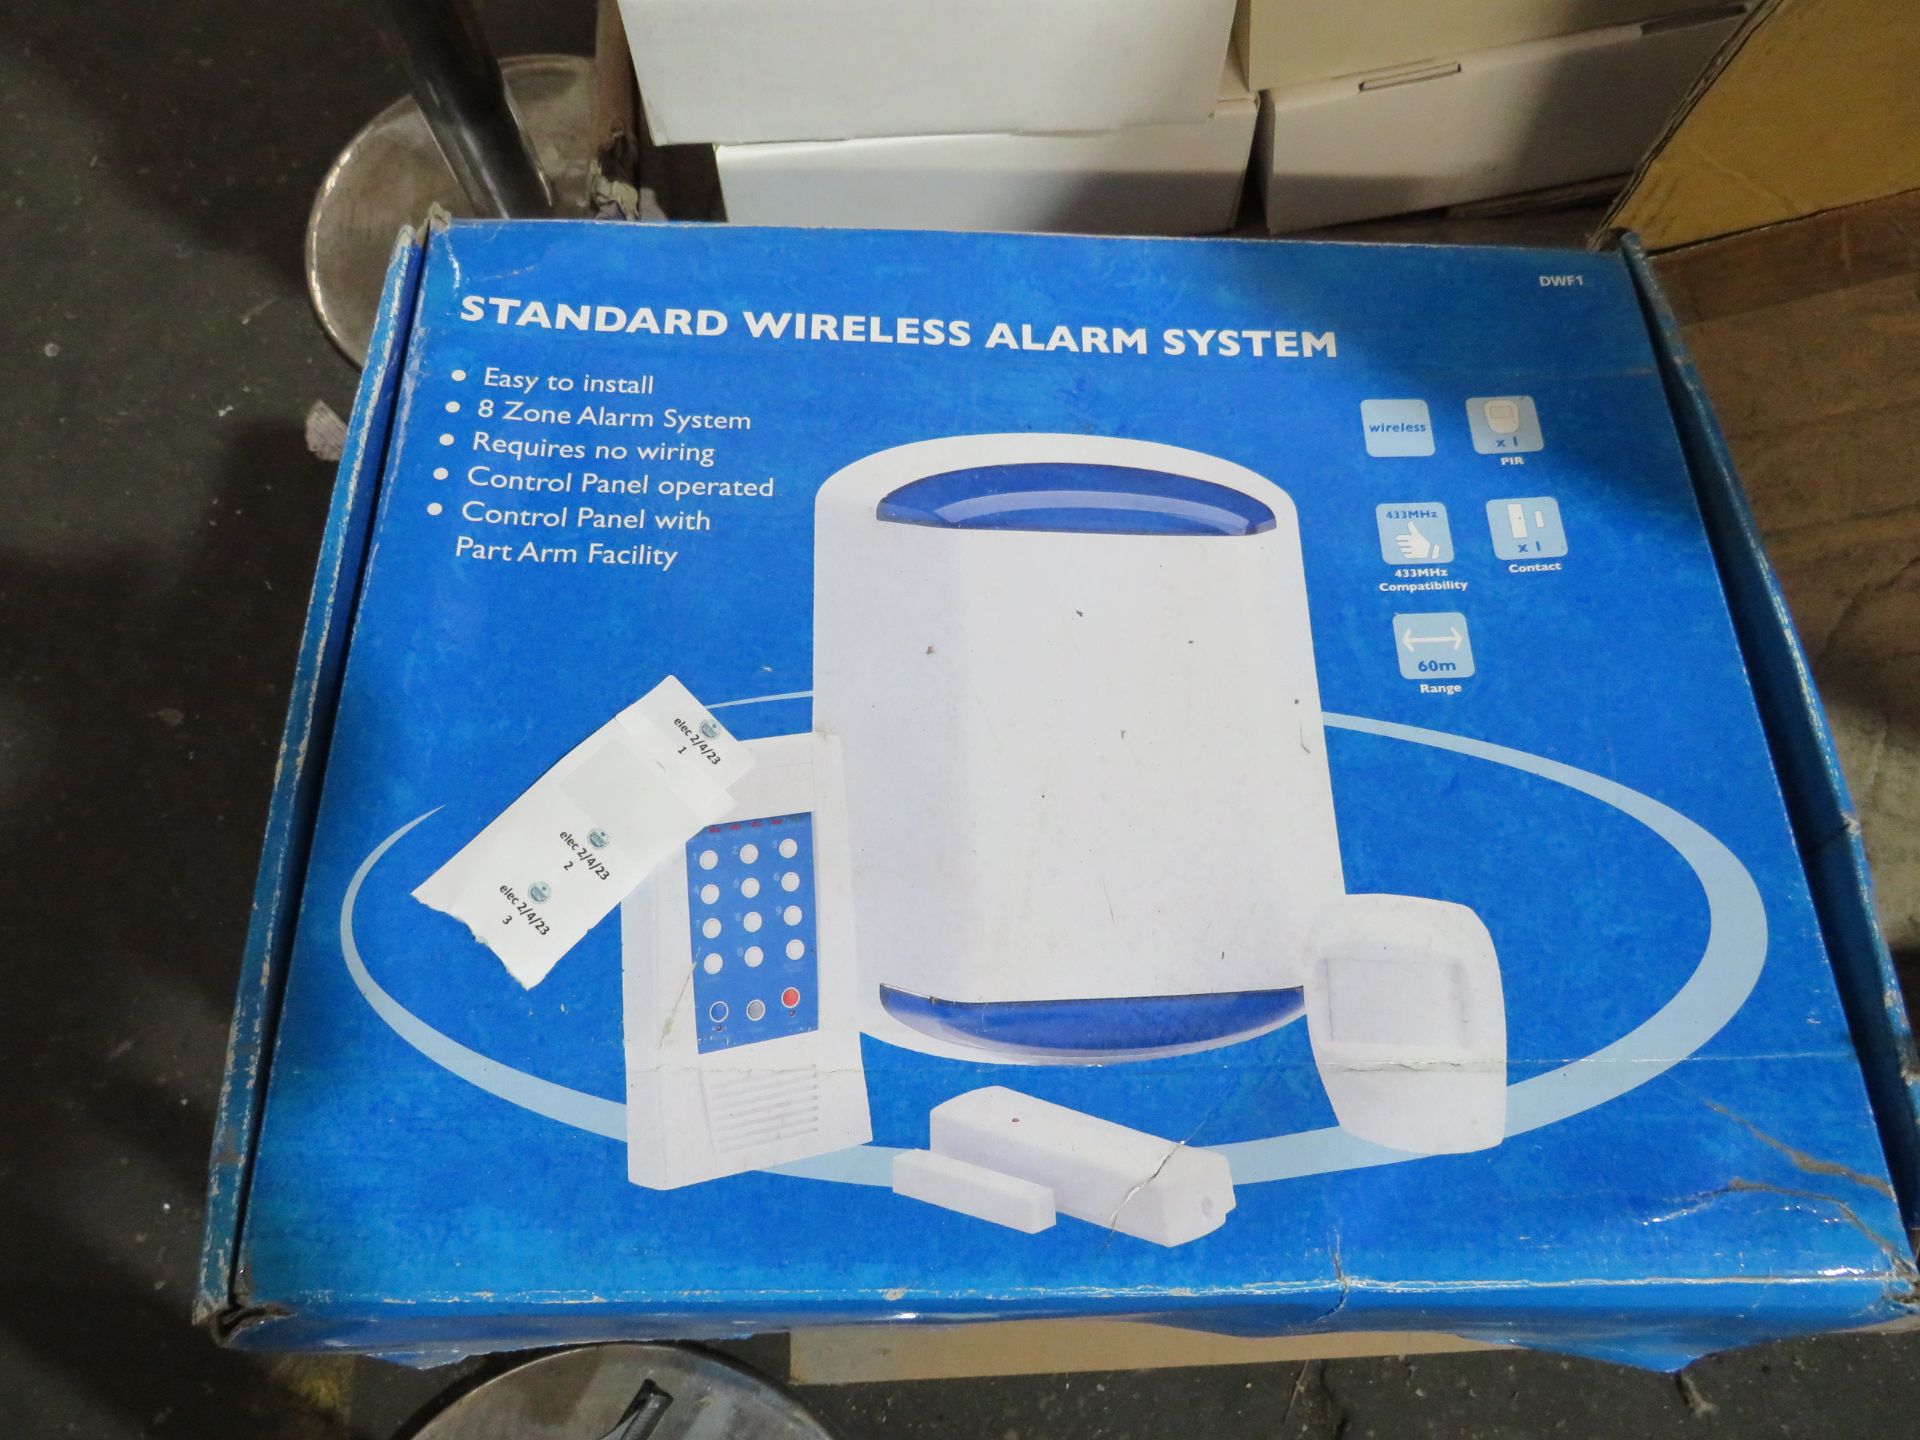 Friedland Standard wireless alarm system, still sealed in the box, the boxes are less than perfect